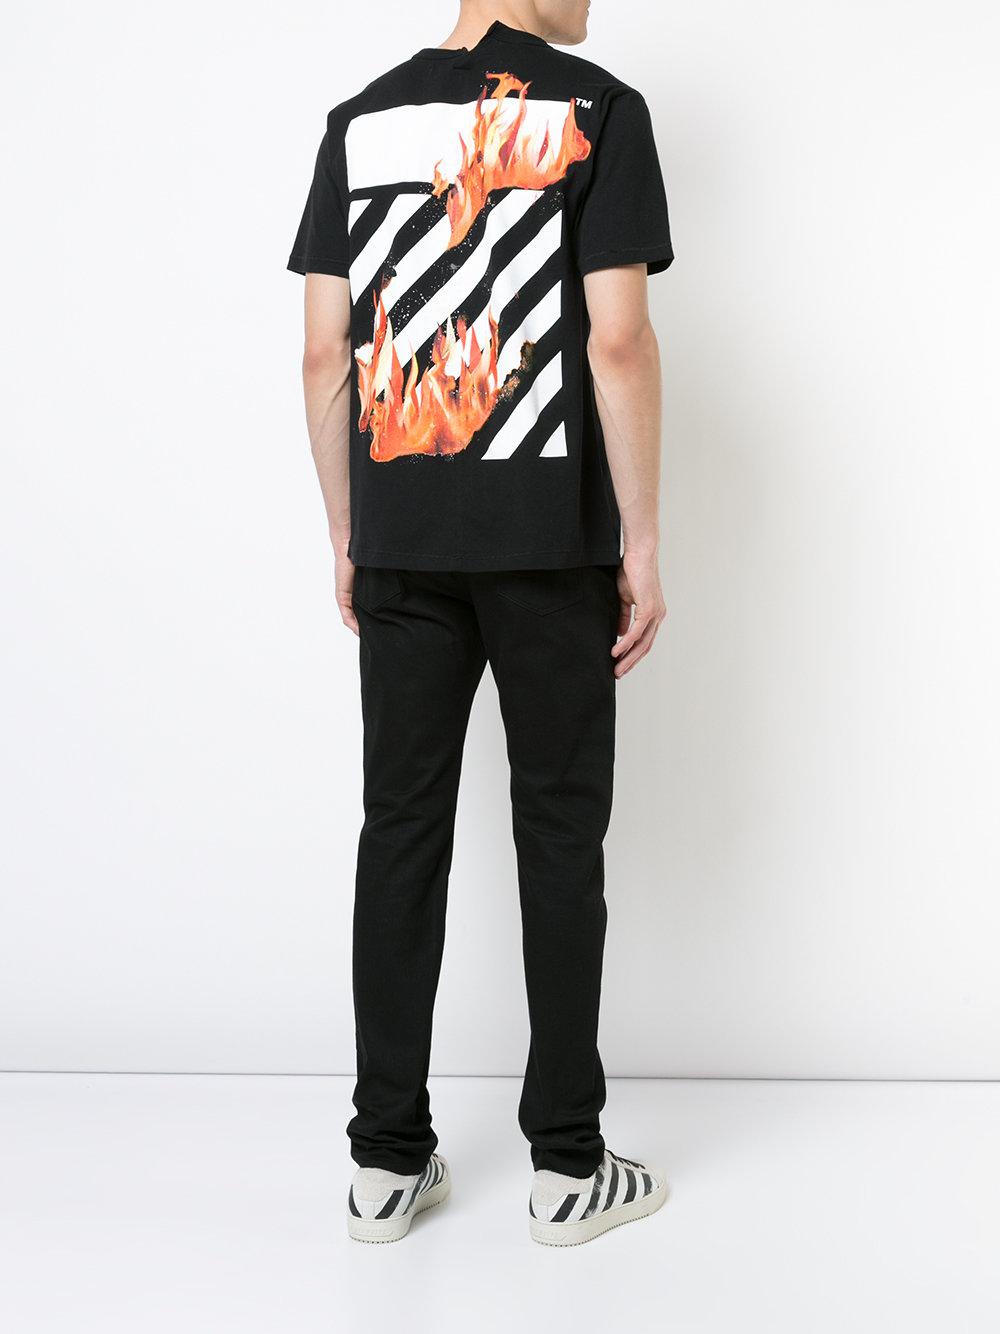 Off-White c/o Virgil Abloh Flame Graphic T-shirt in Black for Men | Lyst